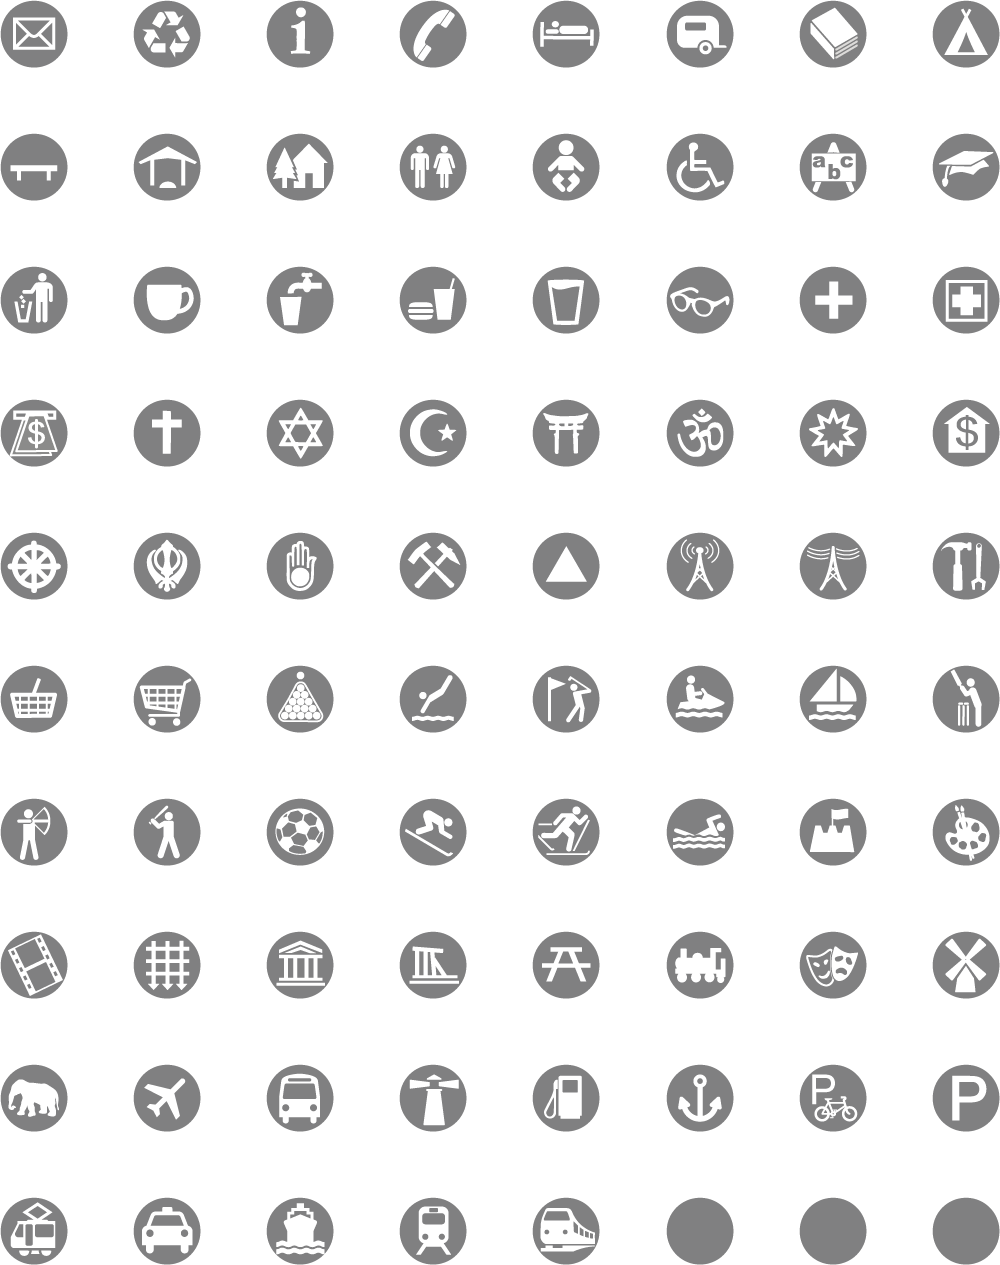 public/potlatch2/icons/icons_grid.png